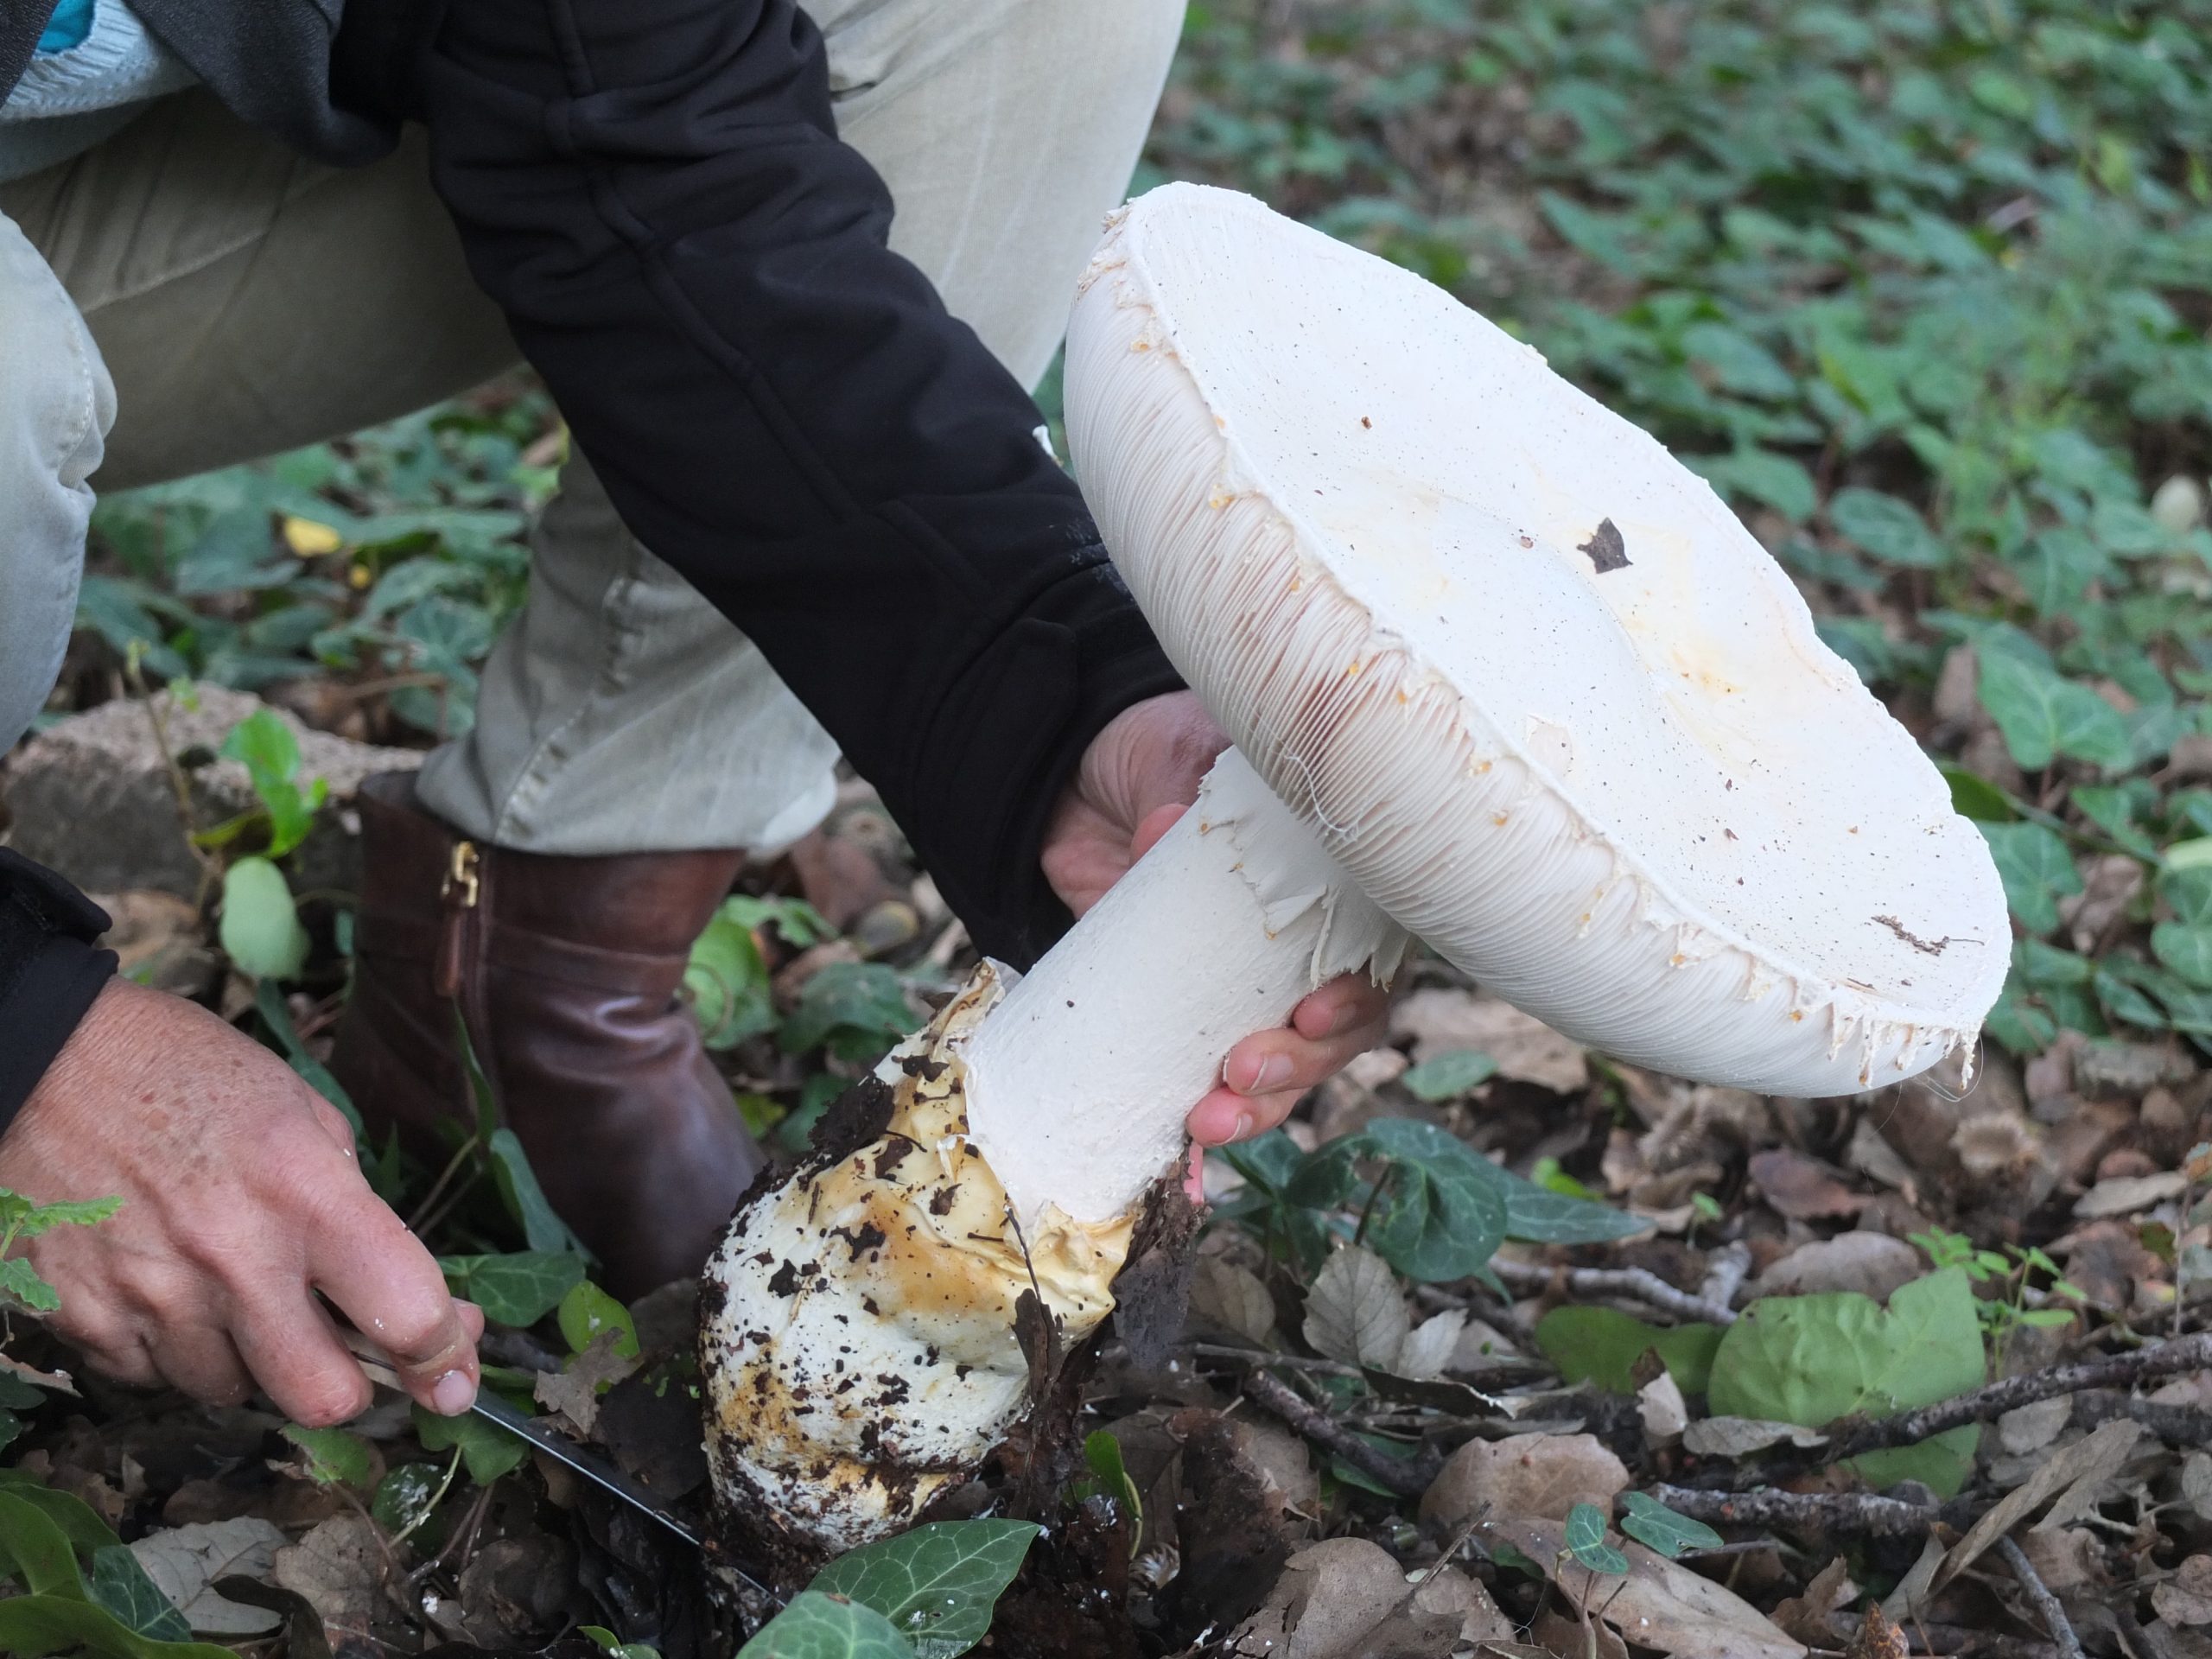 Amanita ovoidea - can be eaten, but is so similar to the poisonous Amanita proxima that even experts are confused. Photo by Tamar Lewisohn